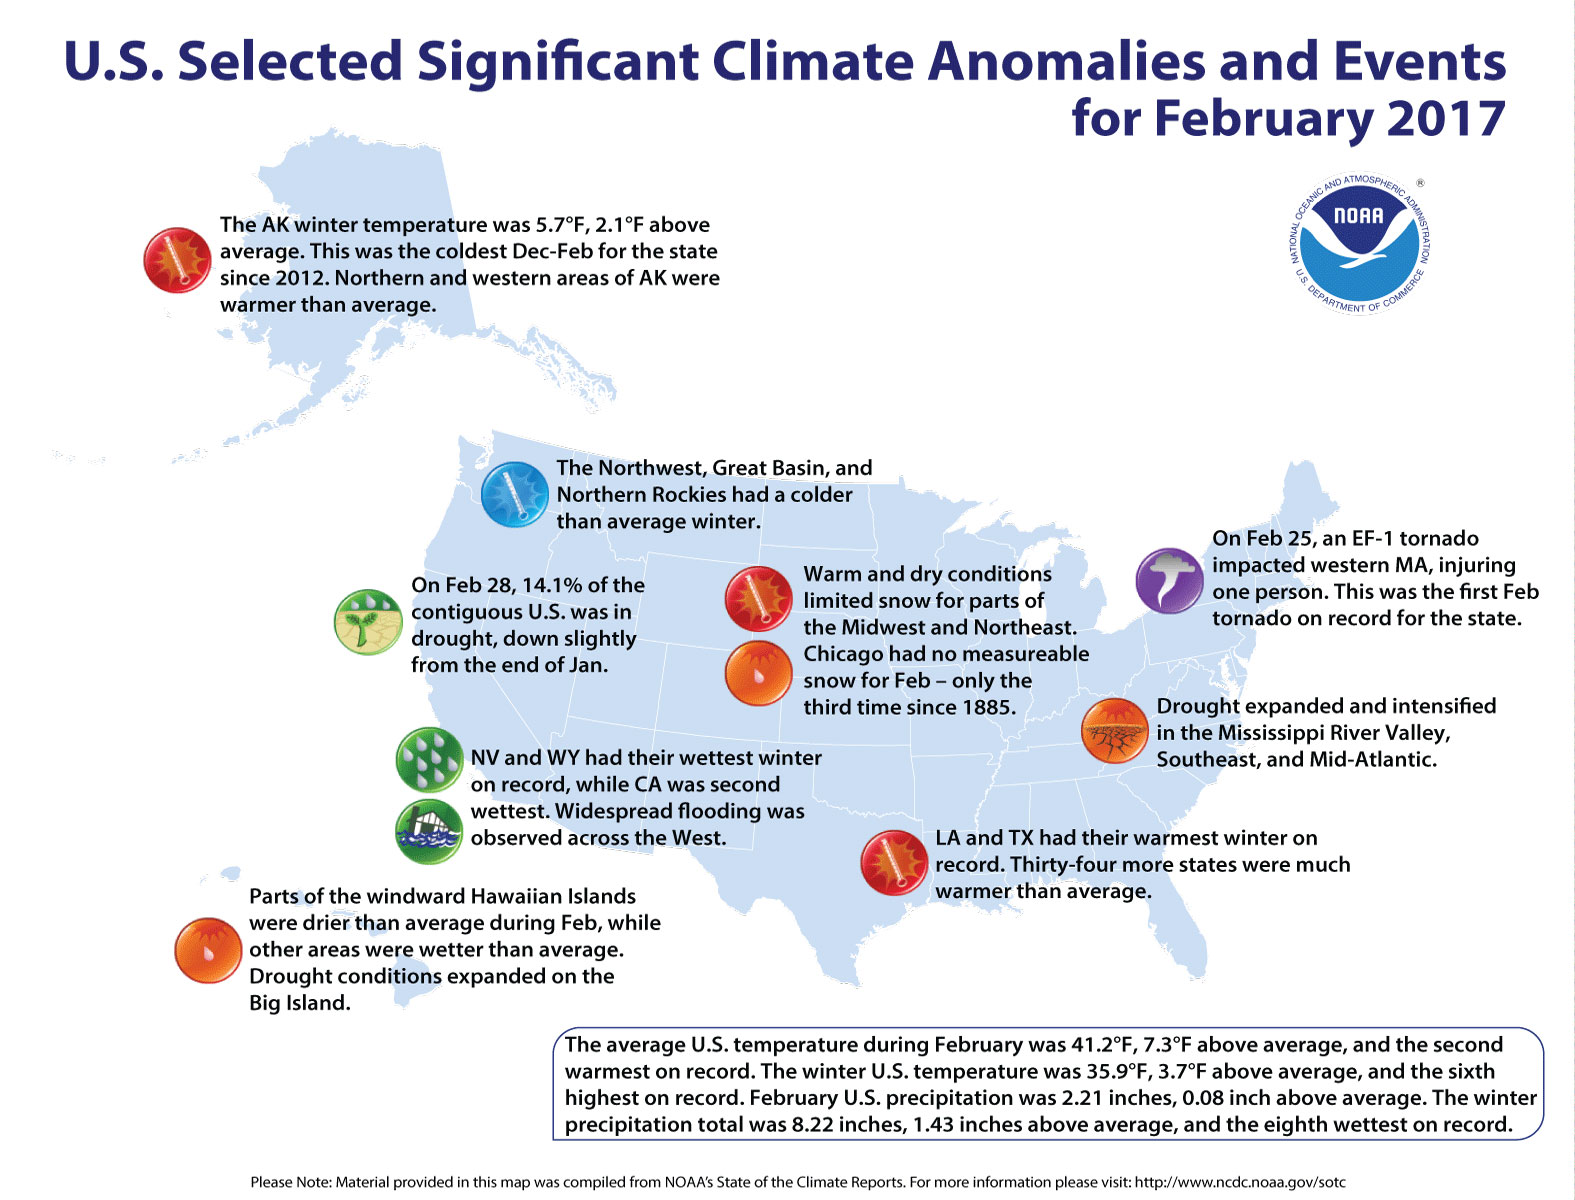 Here are some of the most significant U.S. climate and weather events that occurred in February 2017.